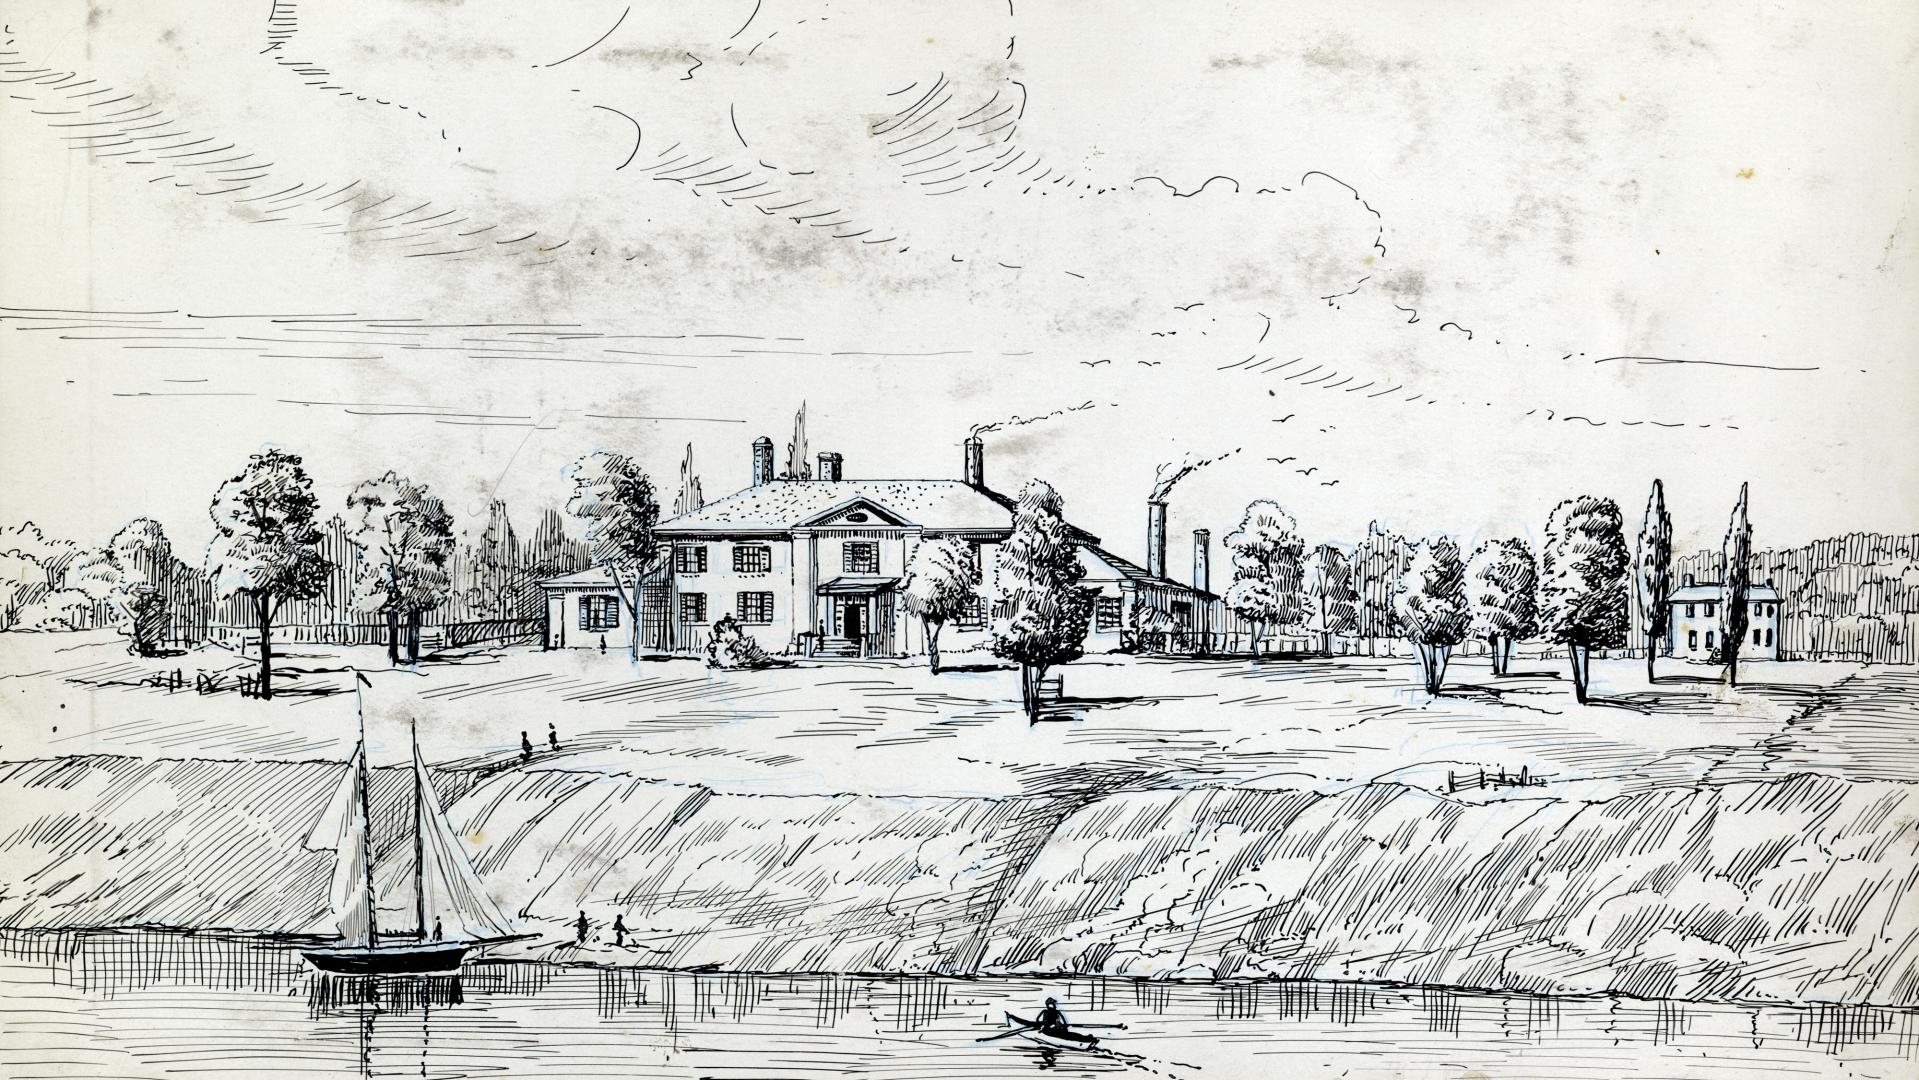 Image shows a few houses and some trees along the lake.